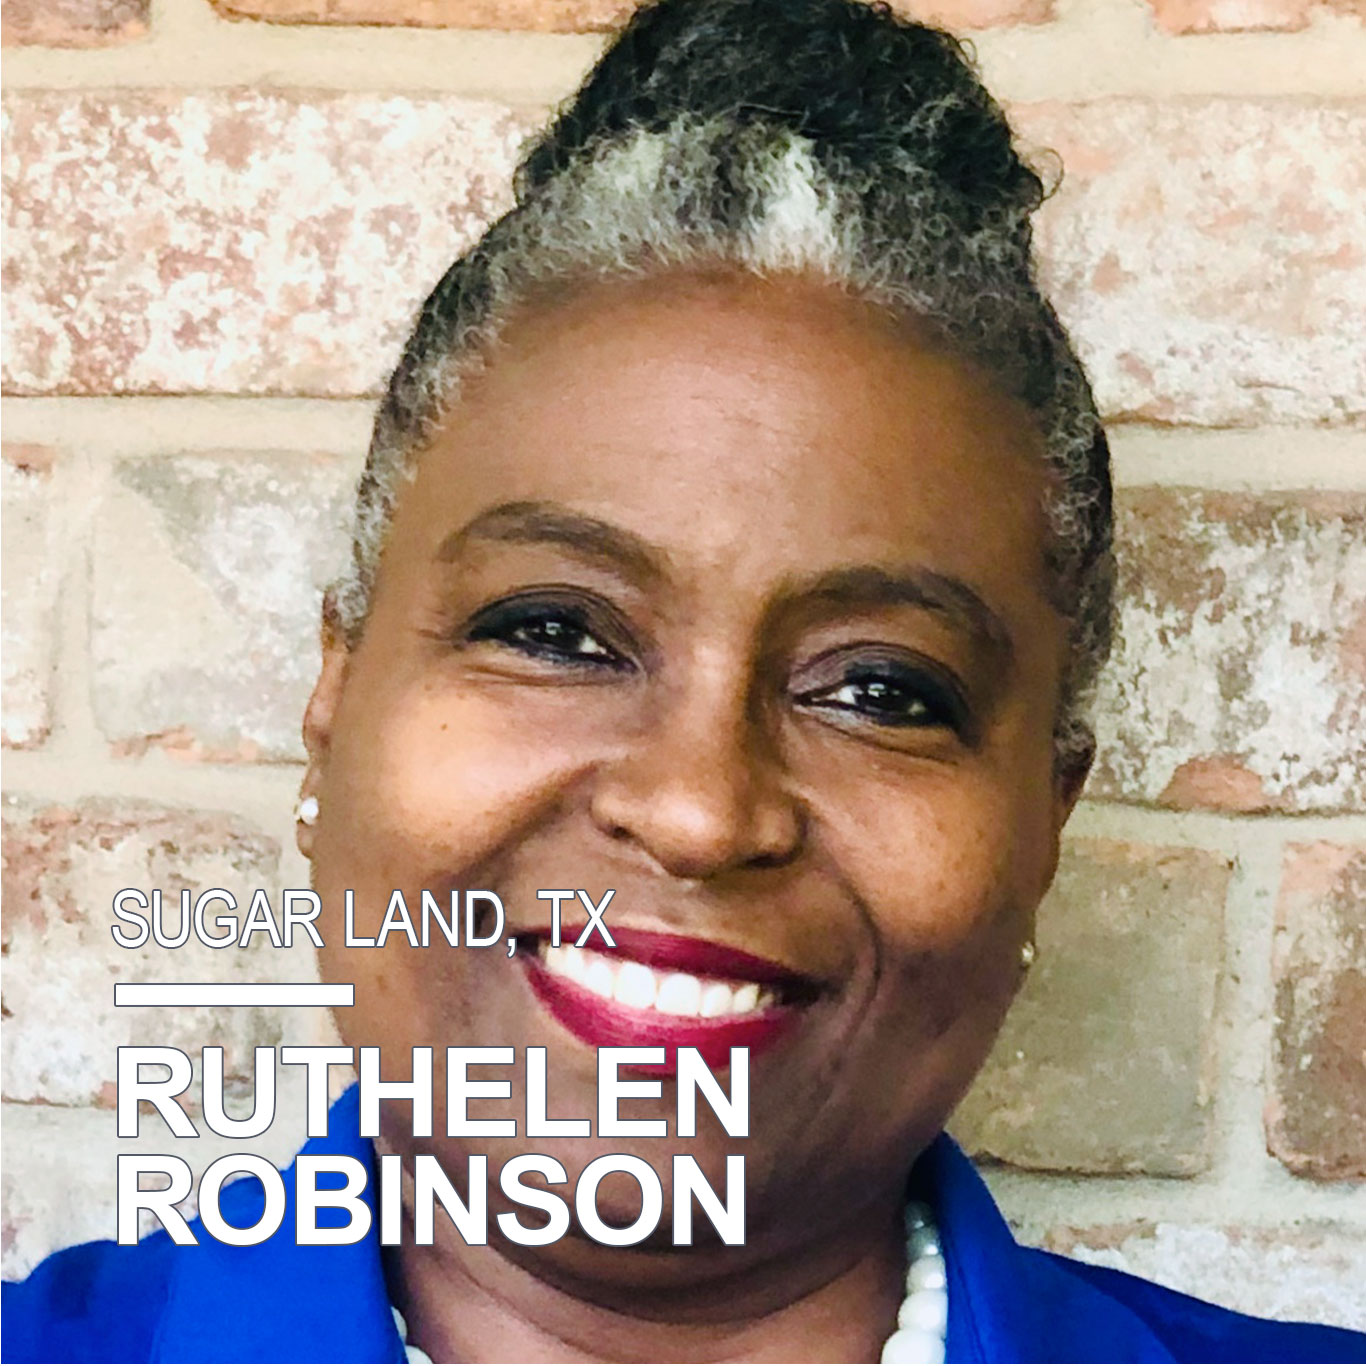 Ruthelen Robinson is a CTE STEM-Engineering teacher at Dulles High School in Sugar Land, TX. She has a bachelor’s degree in Electrical Engineering and a master’s in Business Administration. She’s a member of the Texas Education Agency STEM-Engineering Curriculum Work Group and was named the 2021 Willowridge High School Houston Area Alliance of Black Educators Teacher of the Year. Ruthelen loves seeing the lightbulb turn on when students grasp a concept and encourages her students to let their work speak for them. She’s viewed as a positive, impactful resource among students, teachers, and community members.